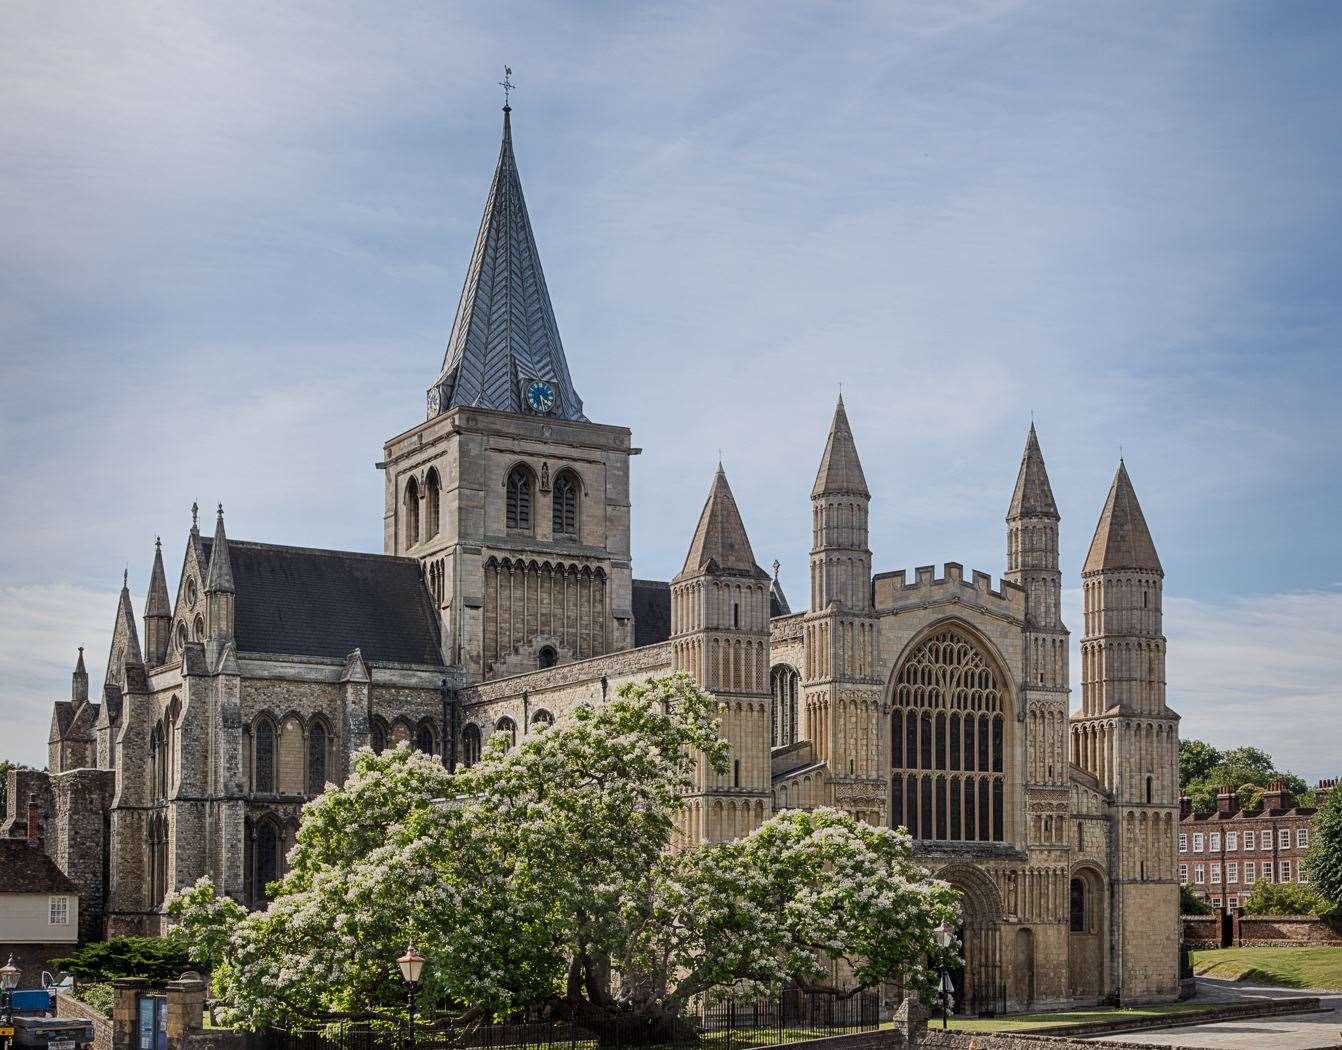 Rochester Cathedral is free to visit